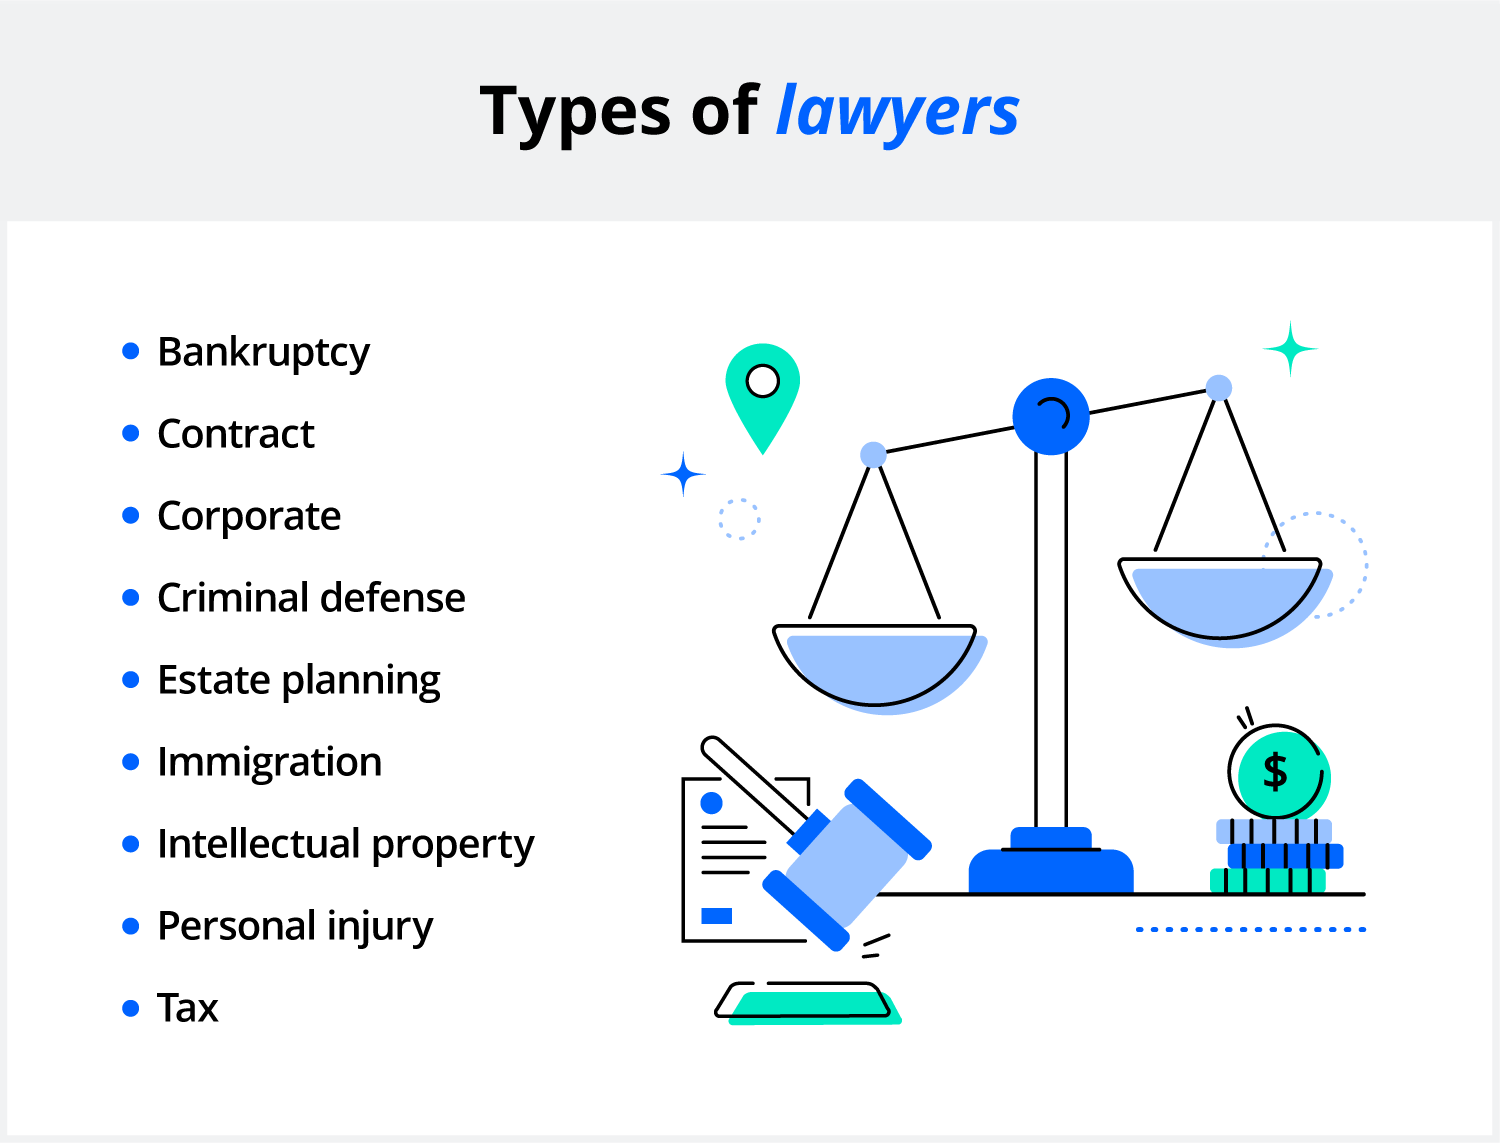 Attorneys can specialize in many areas of law including bankruptcy, contract, corporate, criminal defense, estate planning, immigration, intellectual property, personal injury, and tax. 